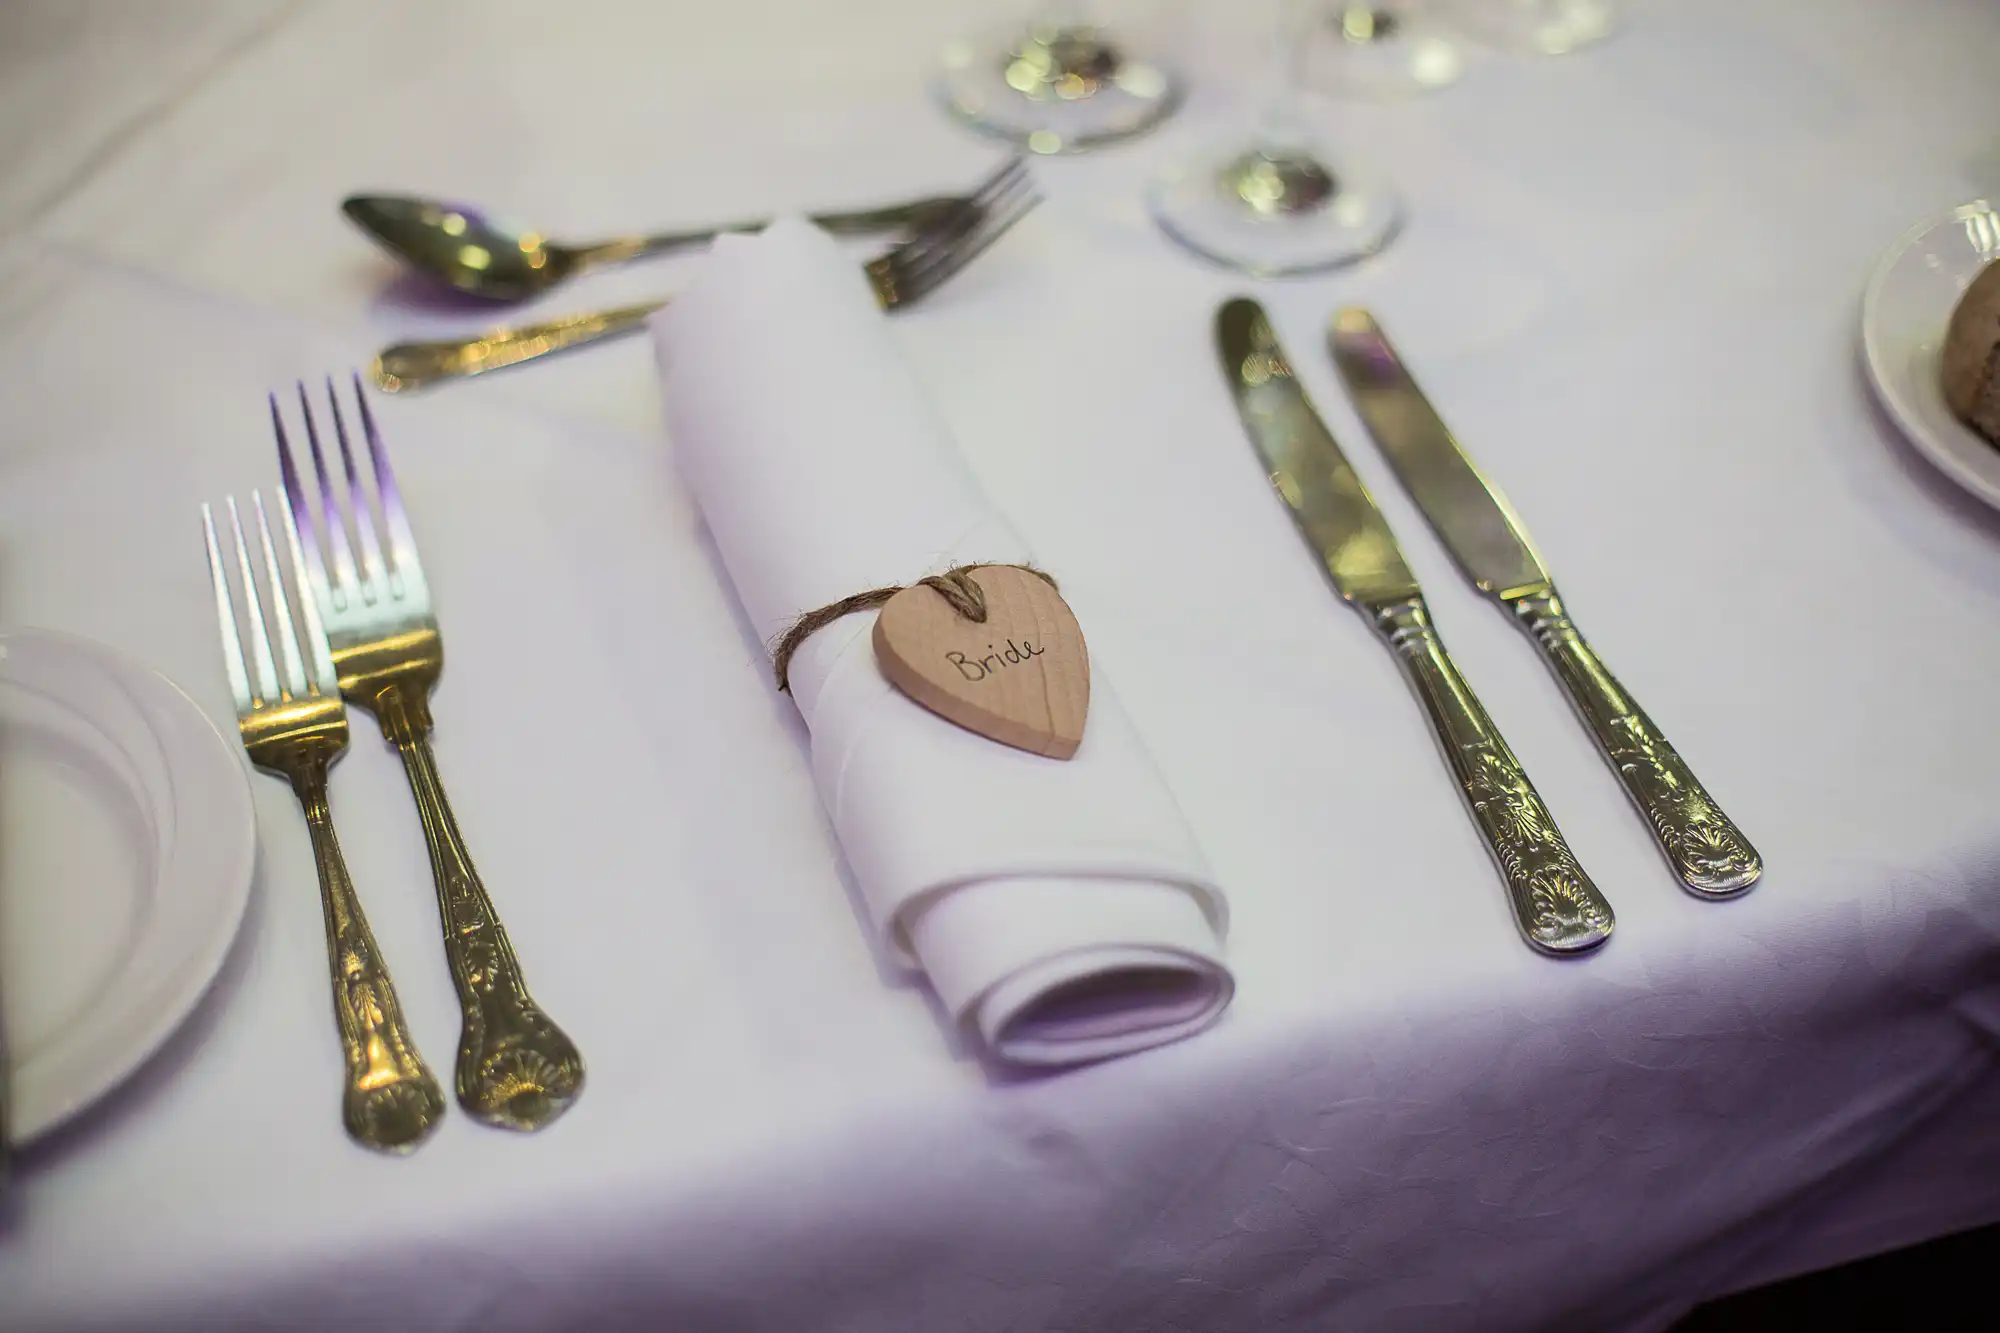 Formal dining setting with a rolled napkin labeled "bride," forks, knives, and glasses on a white tablecloth.